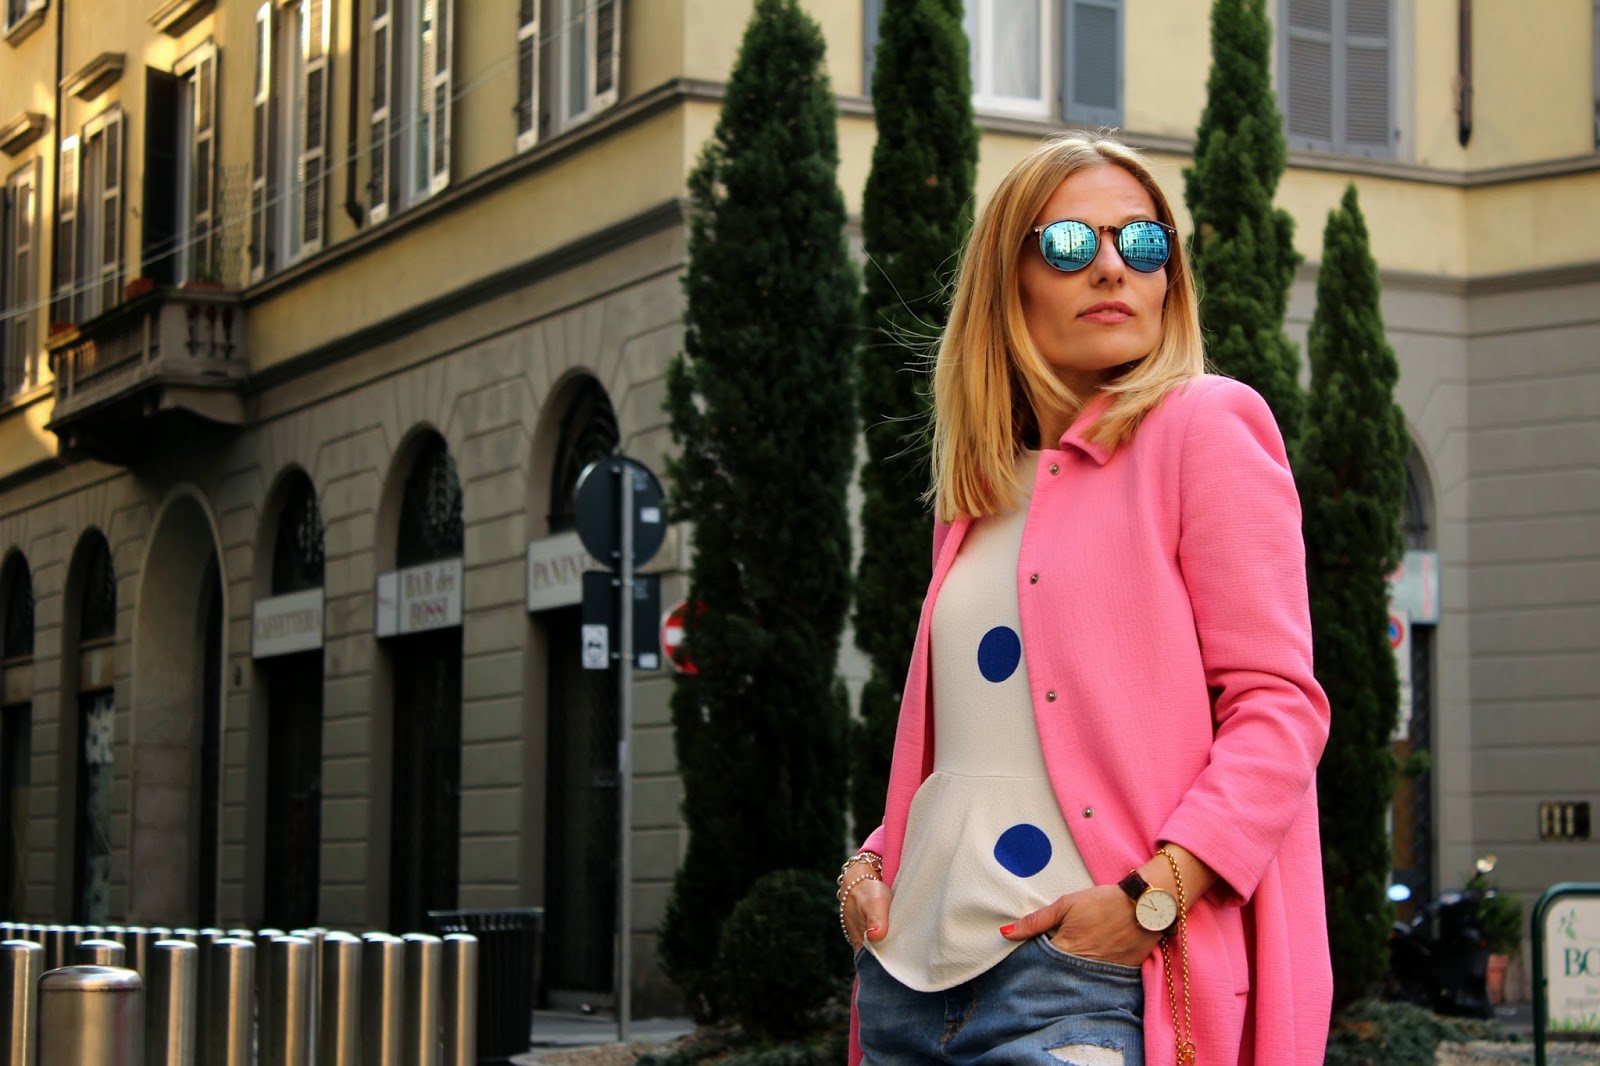 Eniwhere Fashion - Fuorisalone outfit - Total Zara ootd